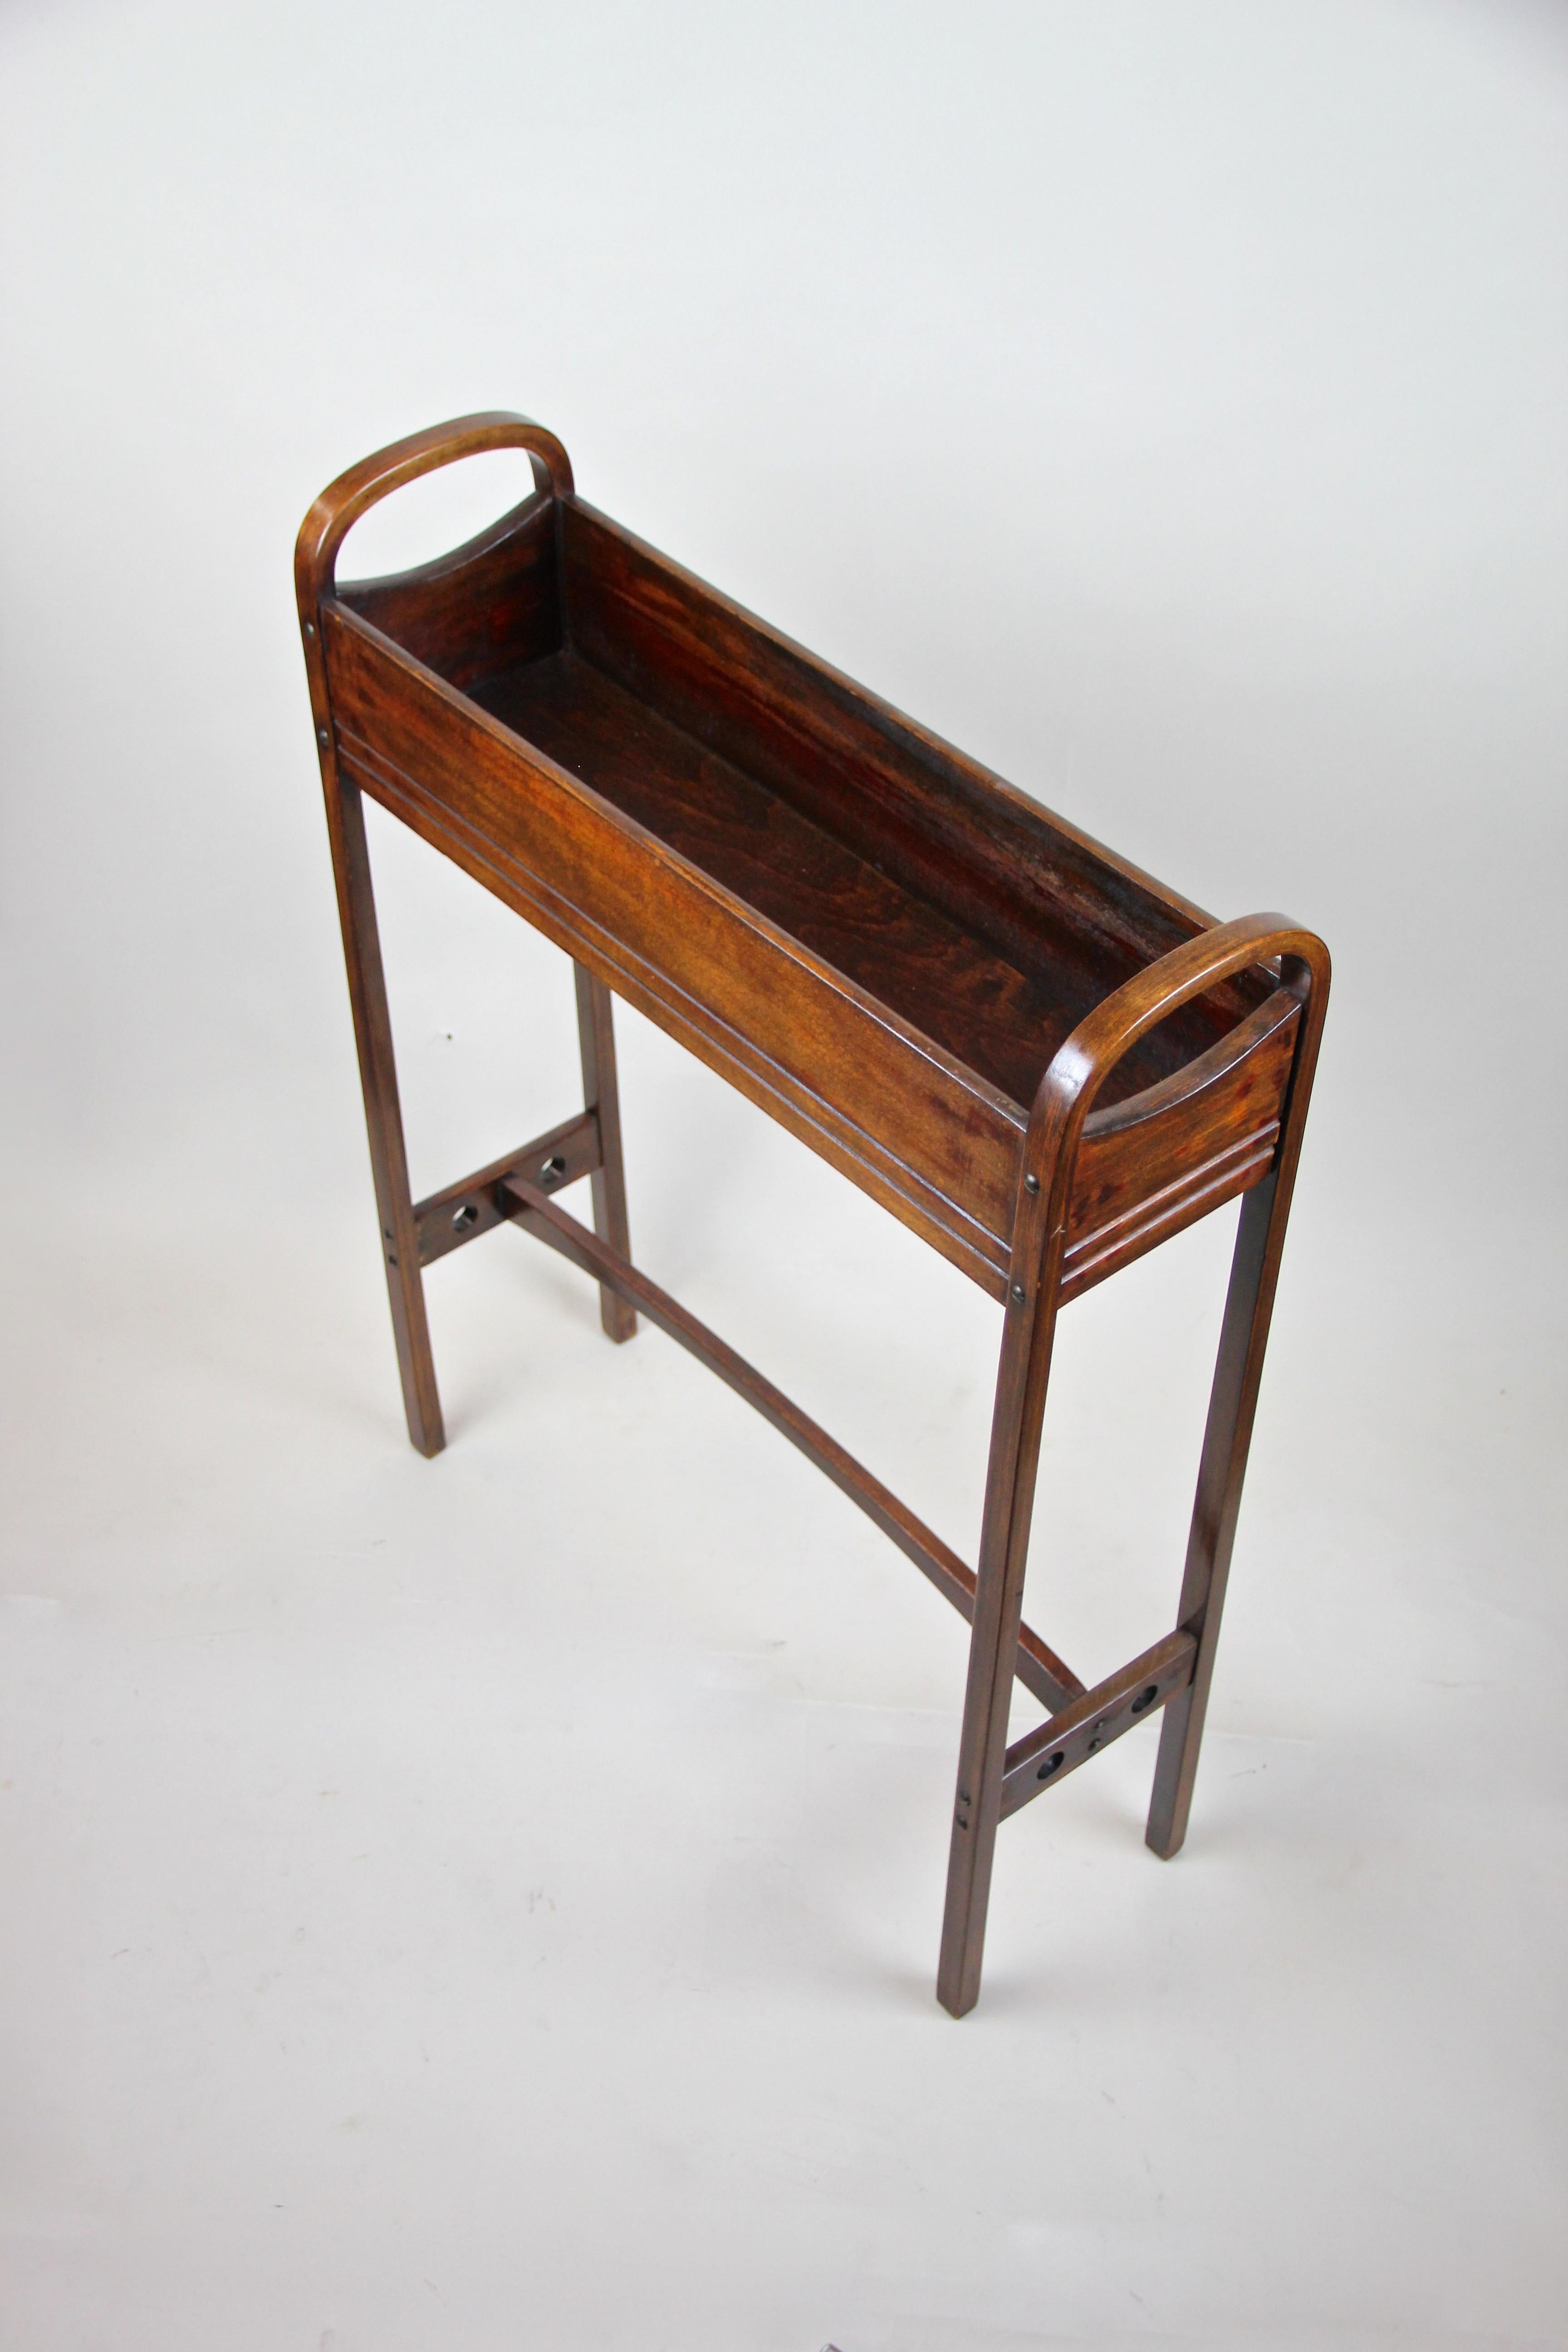 Bentwood Plant Stand or Flower Tub Mod. No. 1 by Thonet, Austria, circa 1915 6